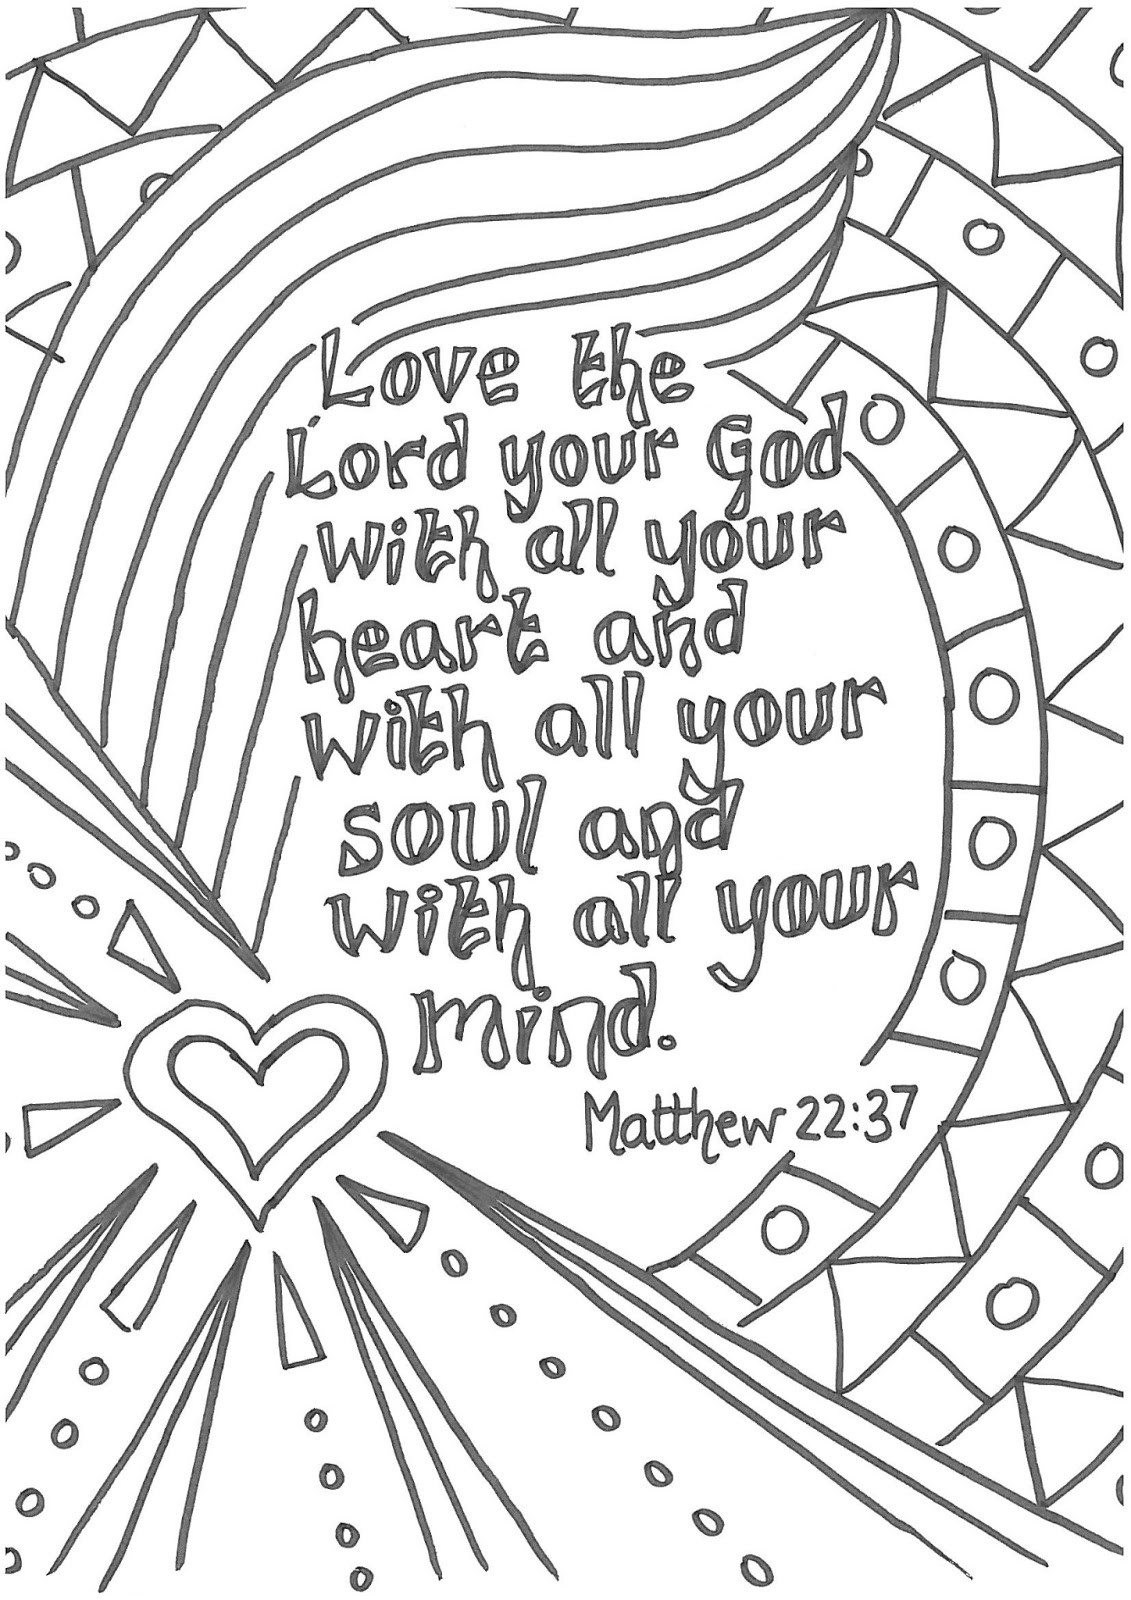 The Lord'S Prayer Coloring Pages Printable
 Flame Creative Children s Ministry Prayers to colour in